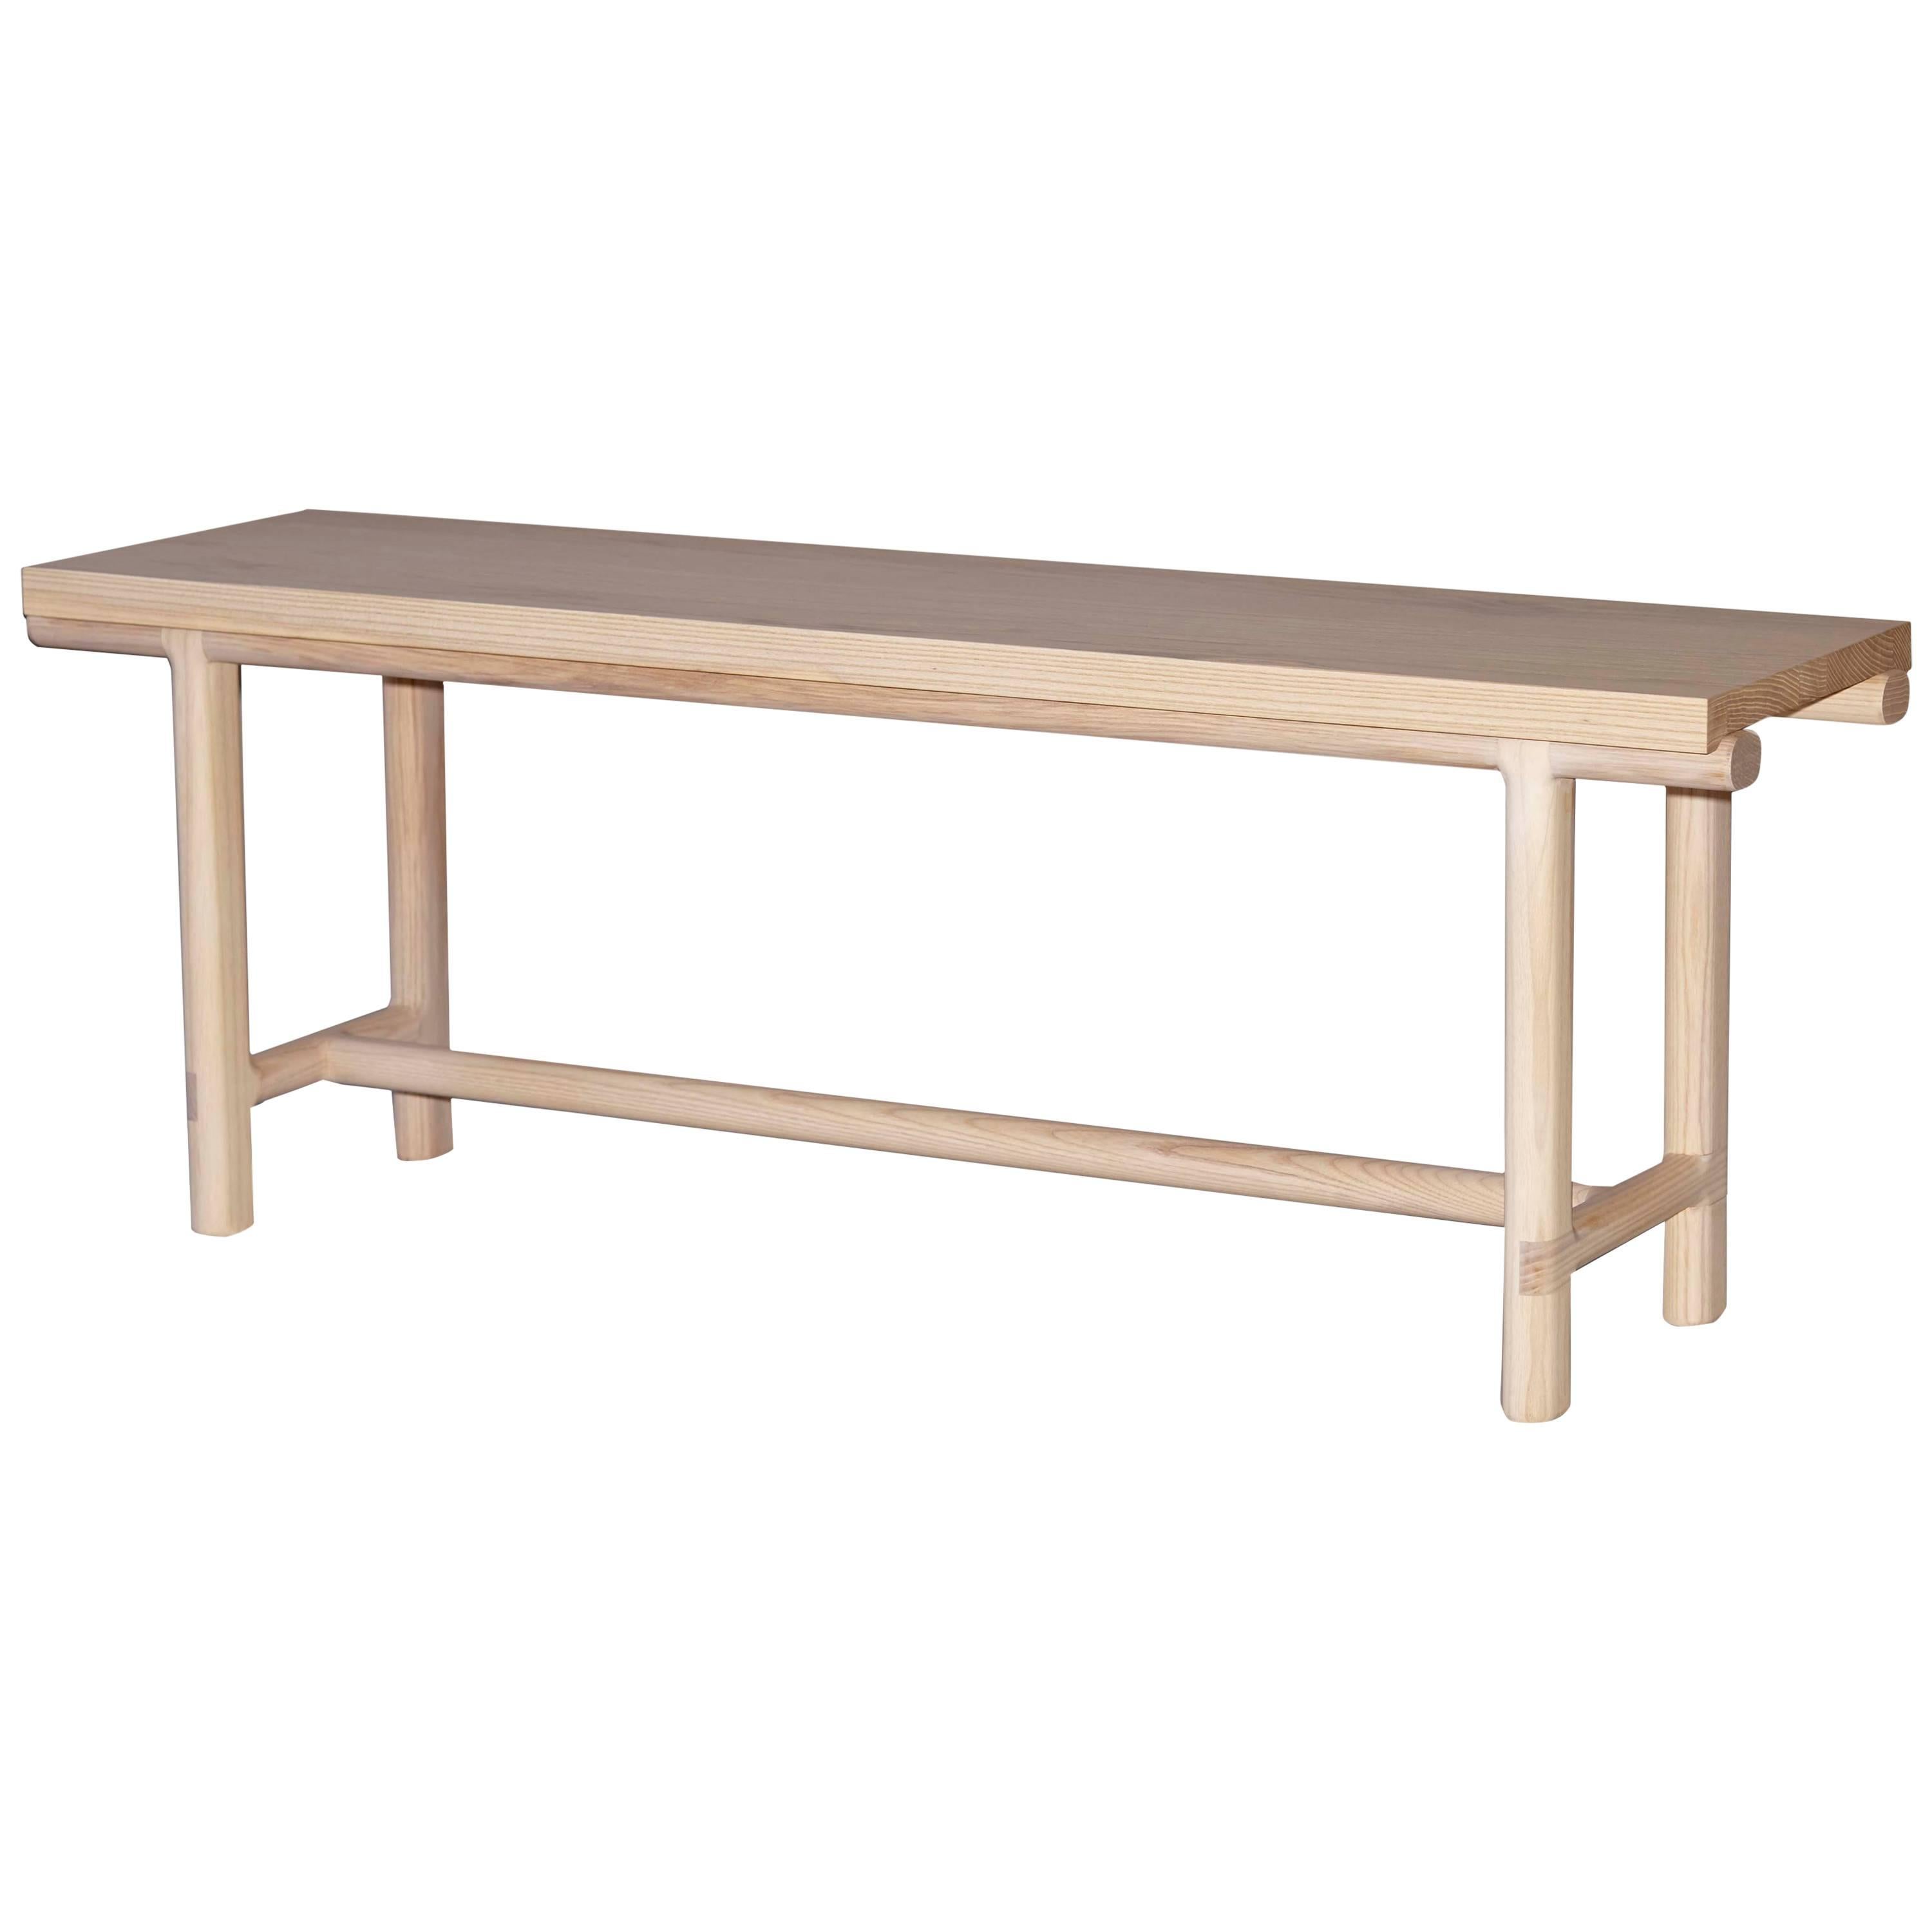 5A Bench by Dane Co. - Customizable sizes and finishes For Sale